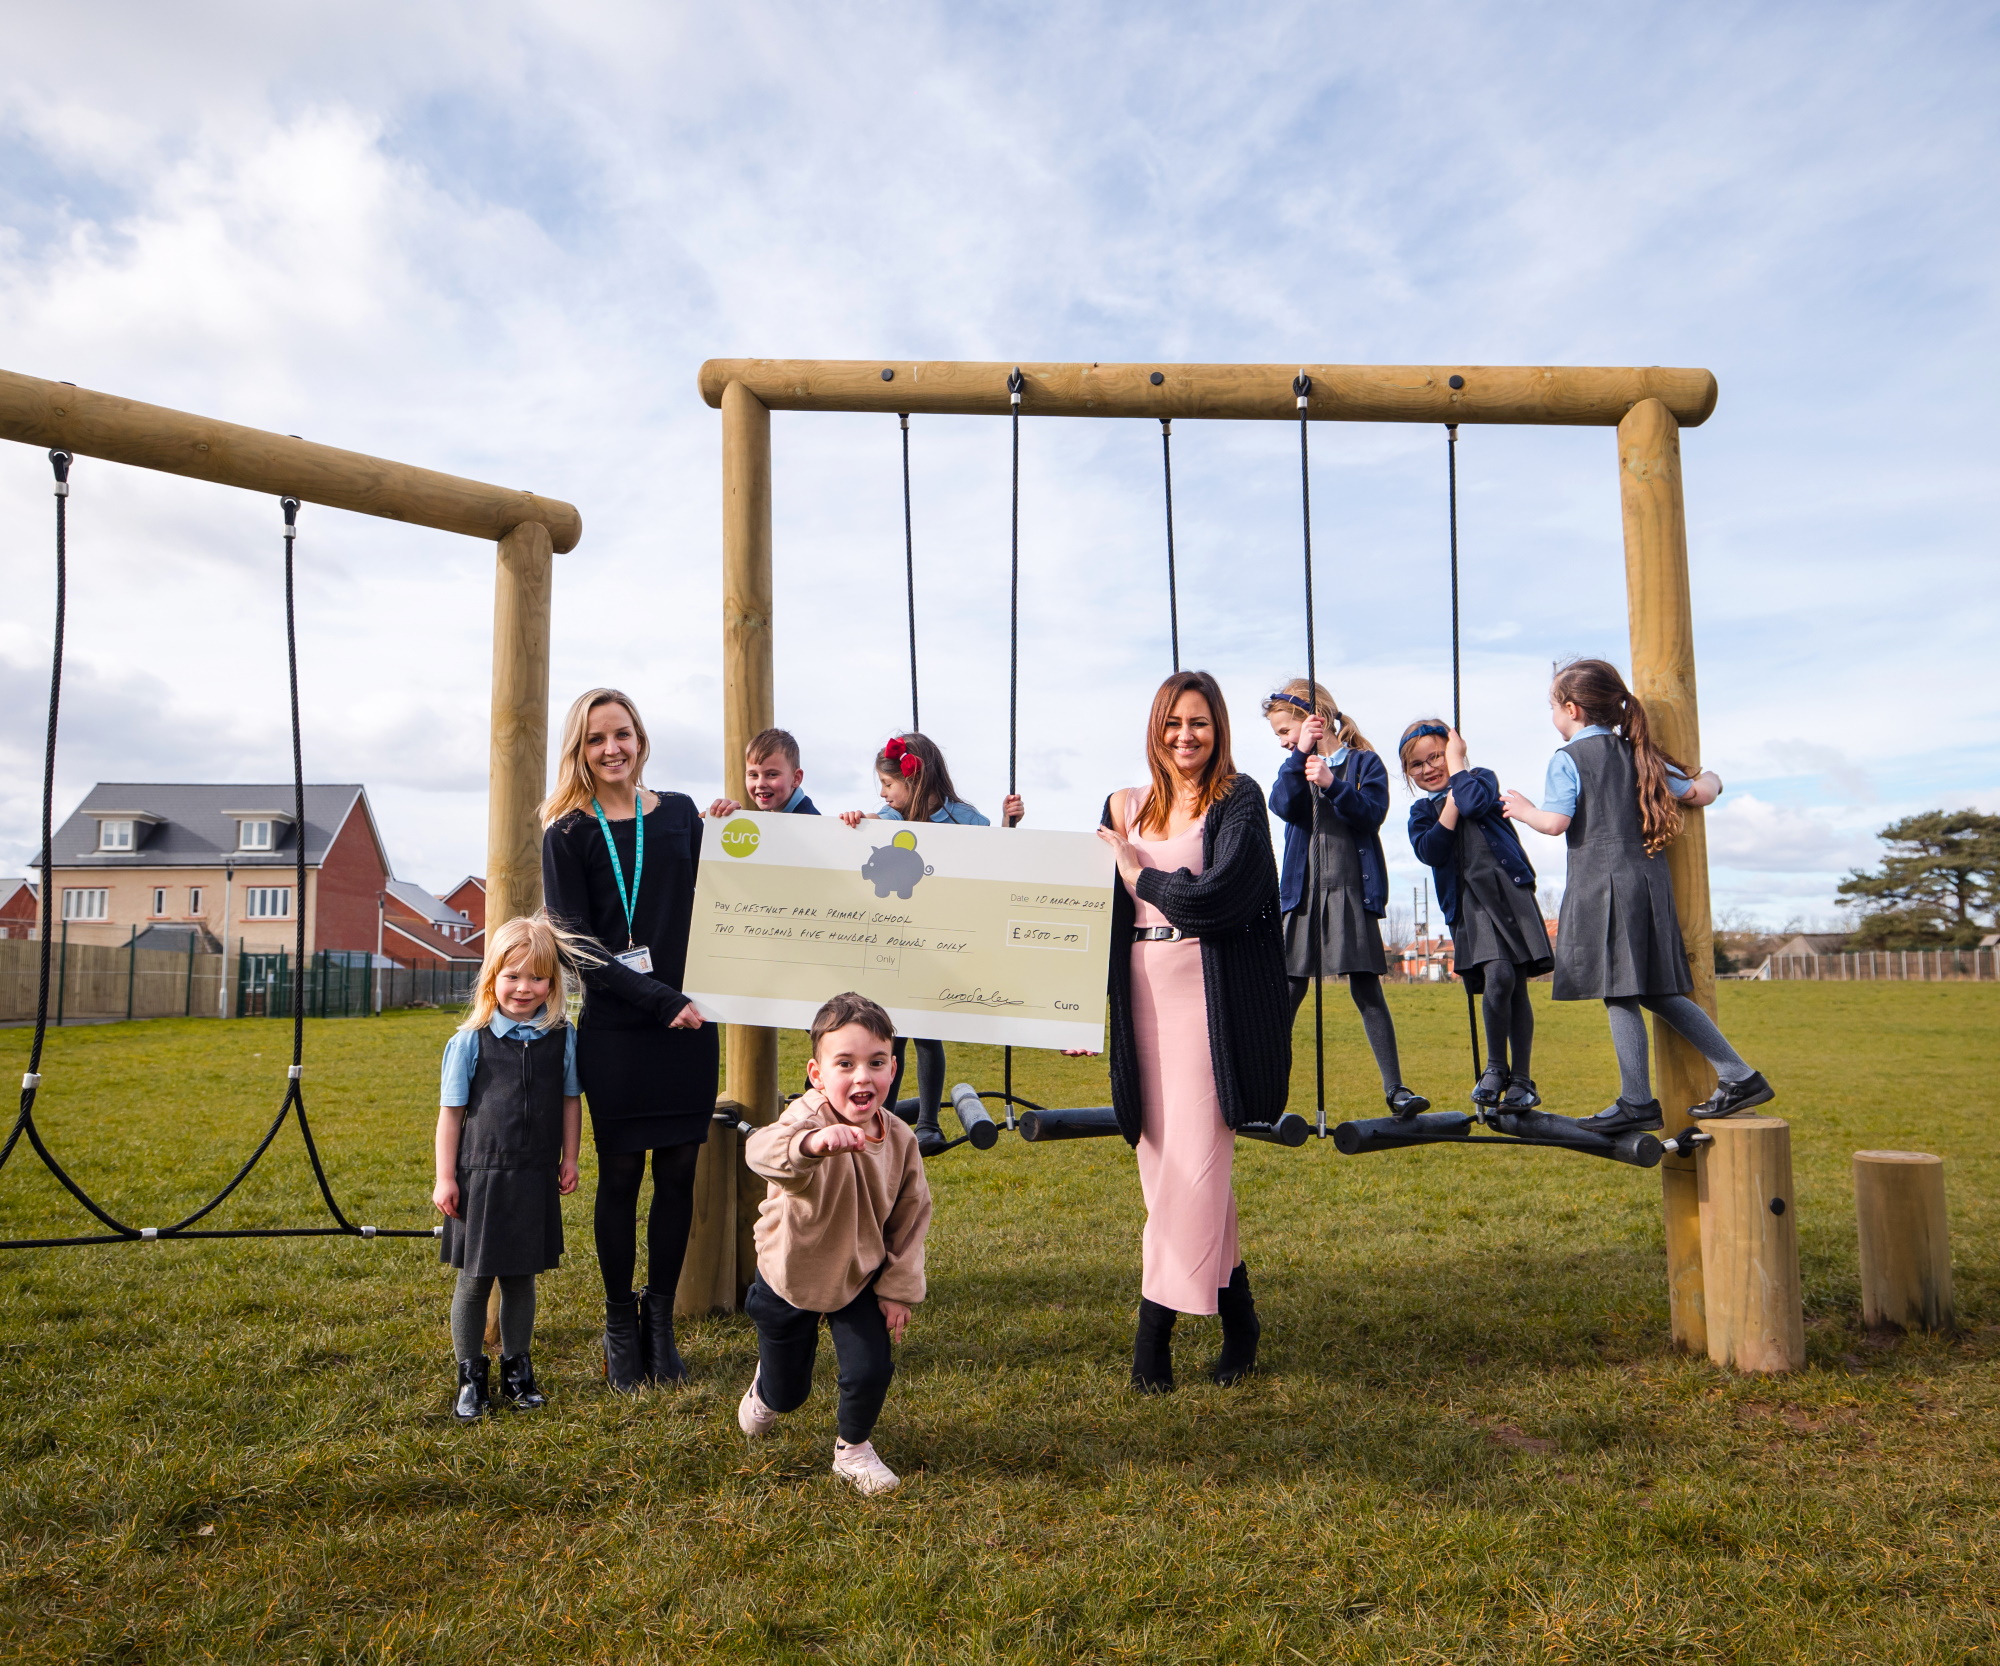  Donation to Yatton school means new play area for local children 